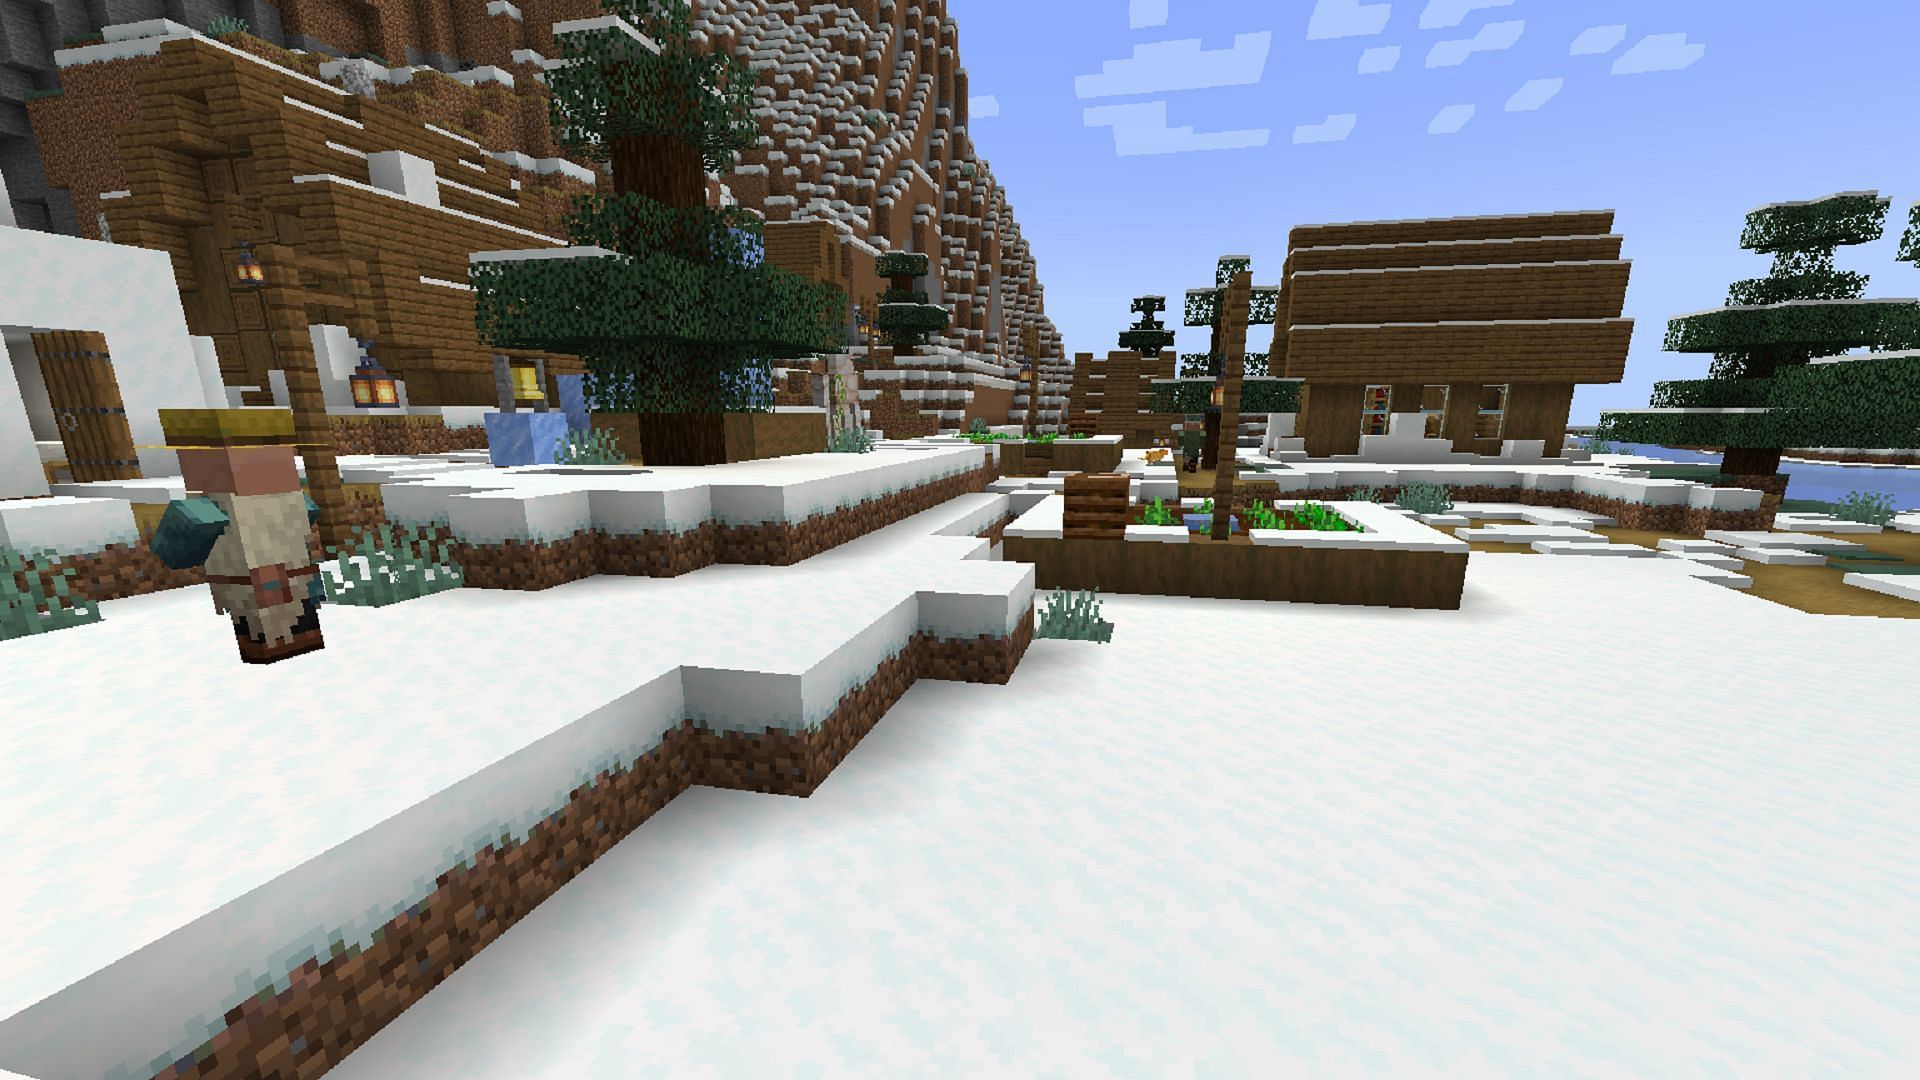 This seed offers plenty of snowy villages for players who prefer colder climates (Image via Mojang)